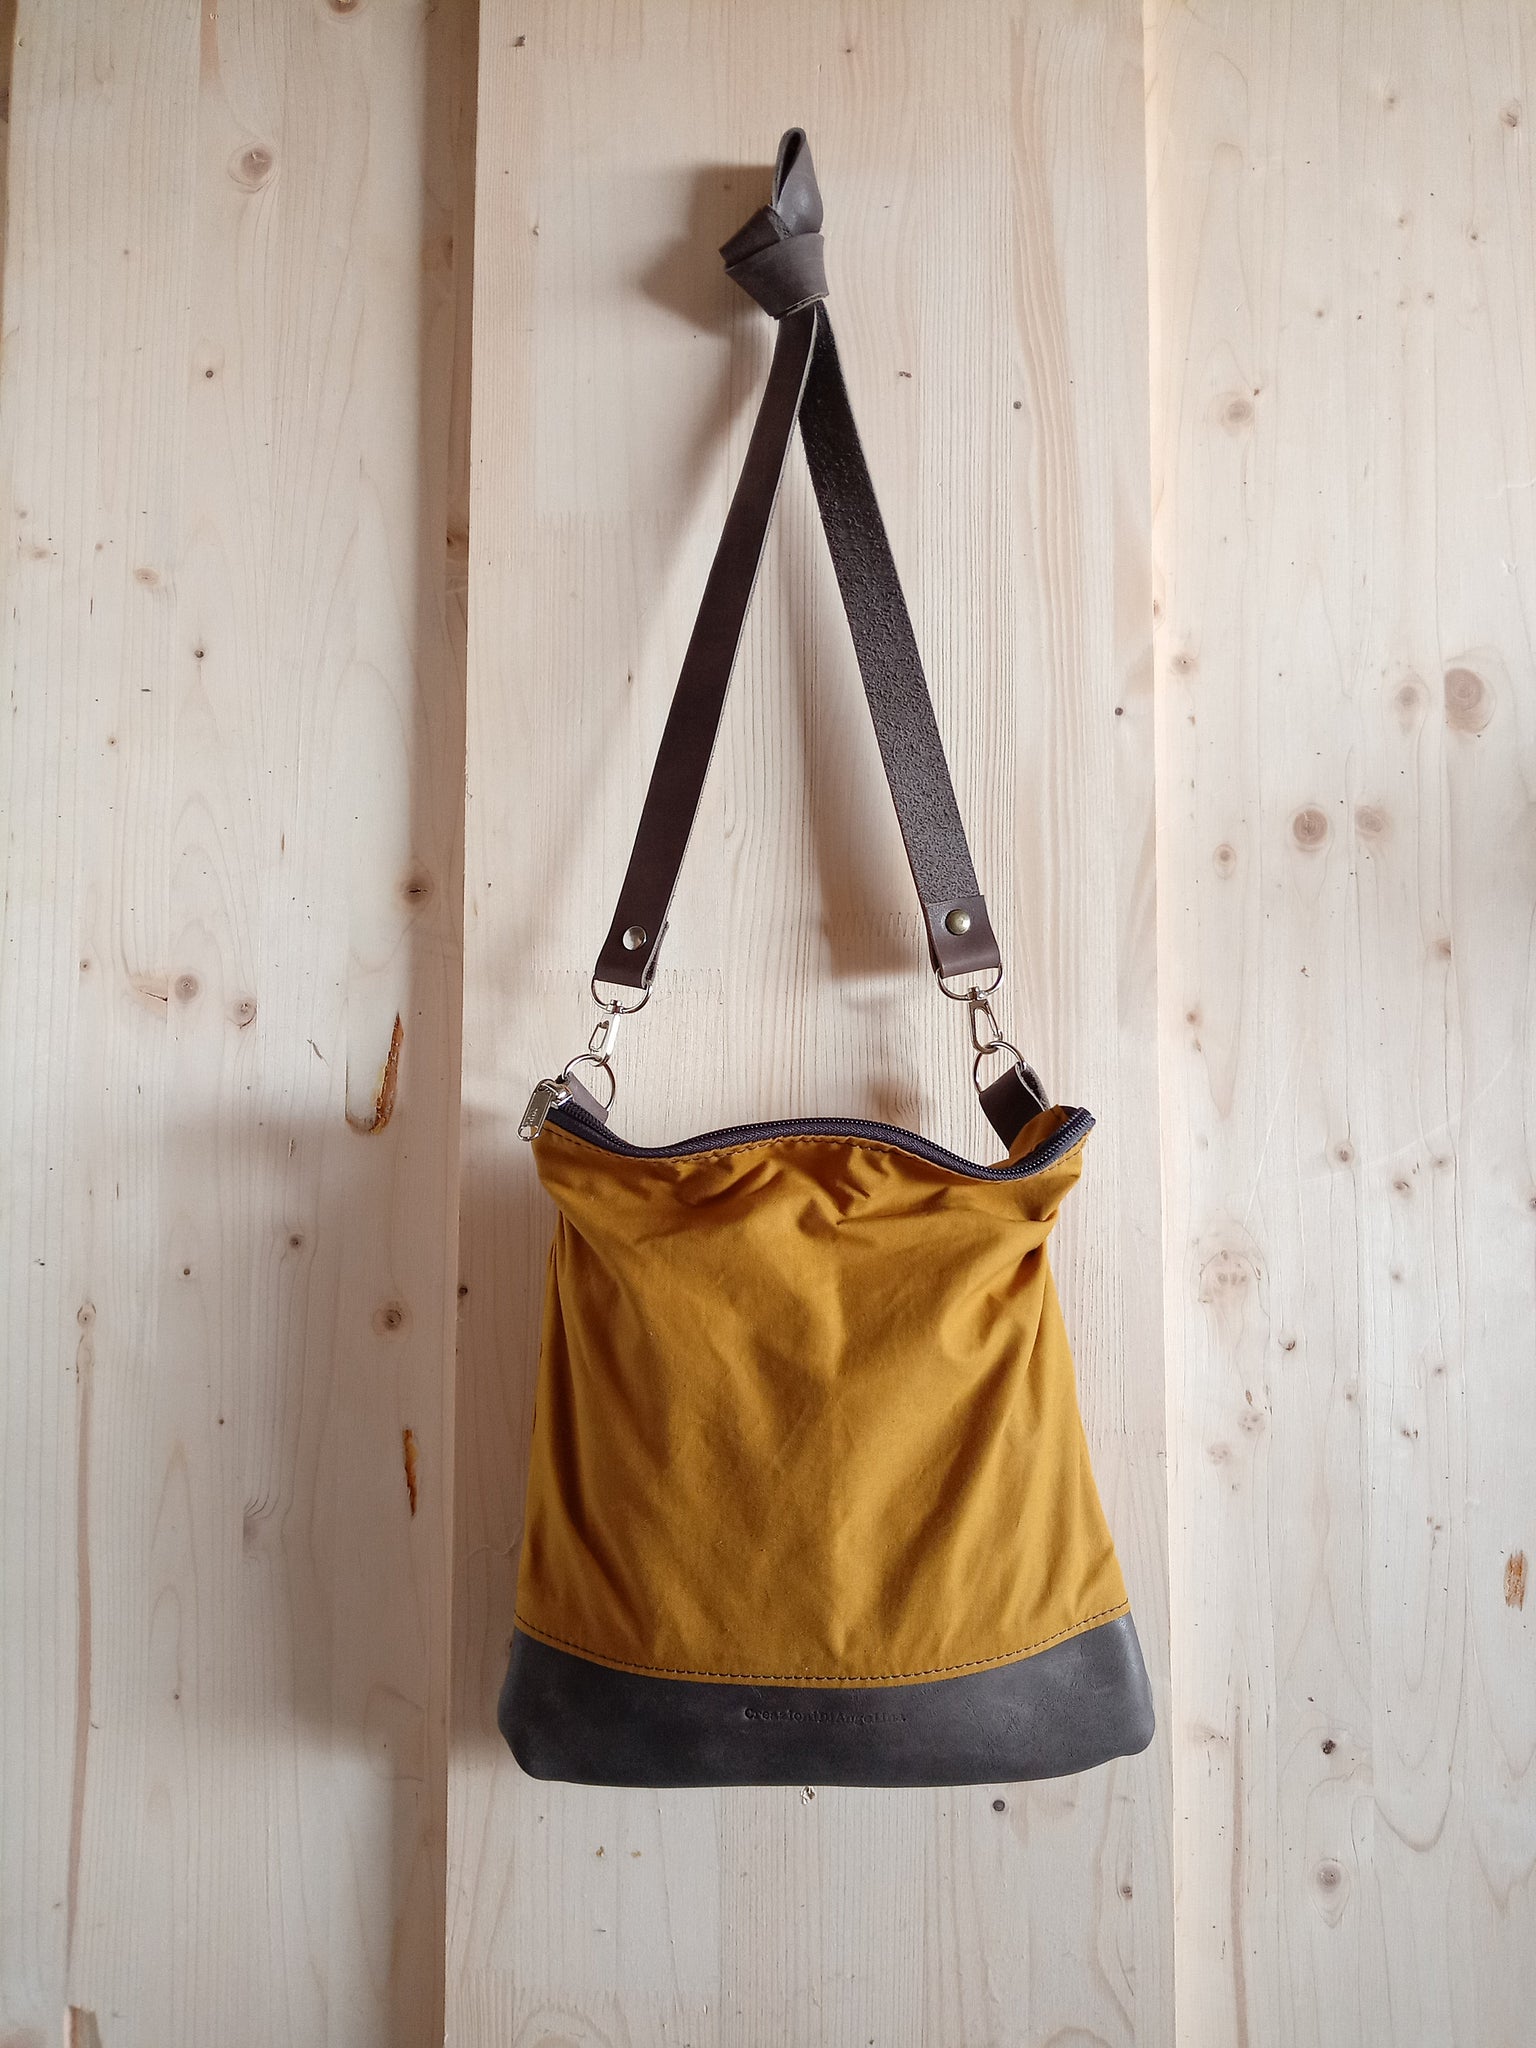 Waxed canvas shoulder bag with zipper, crossbody bags for women